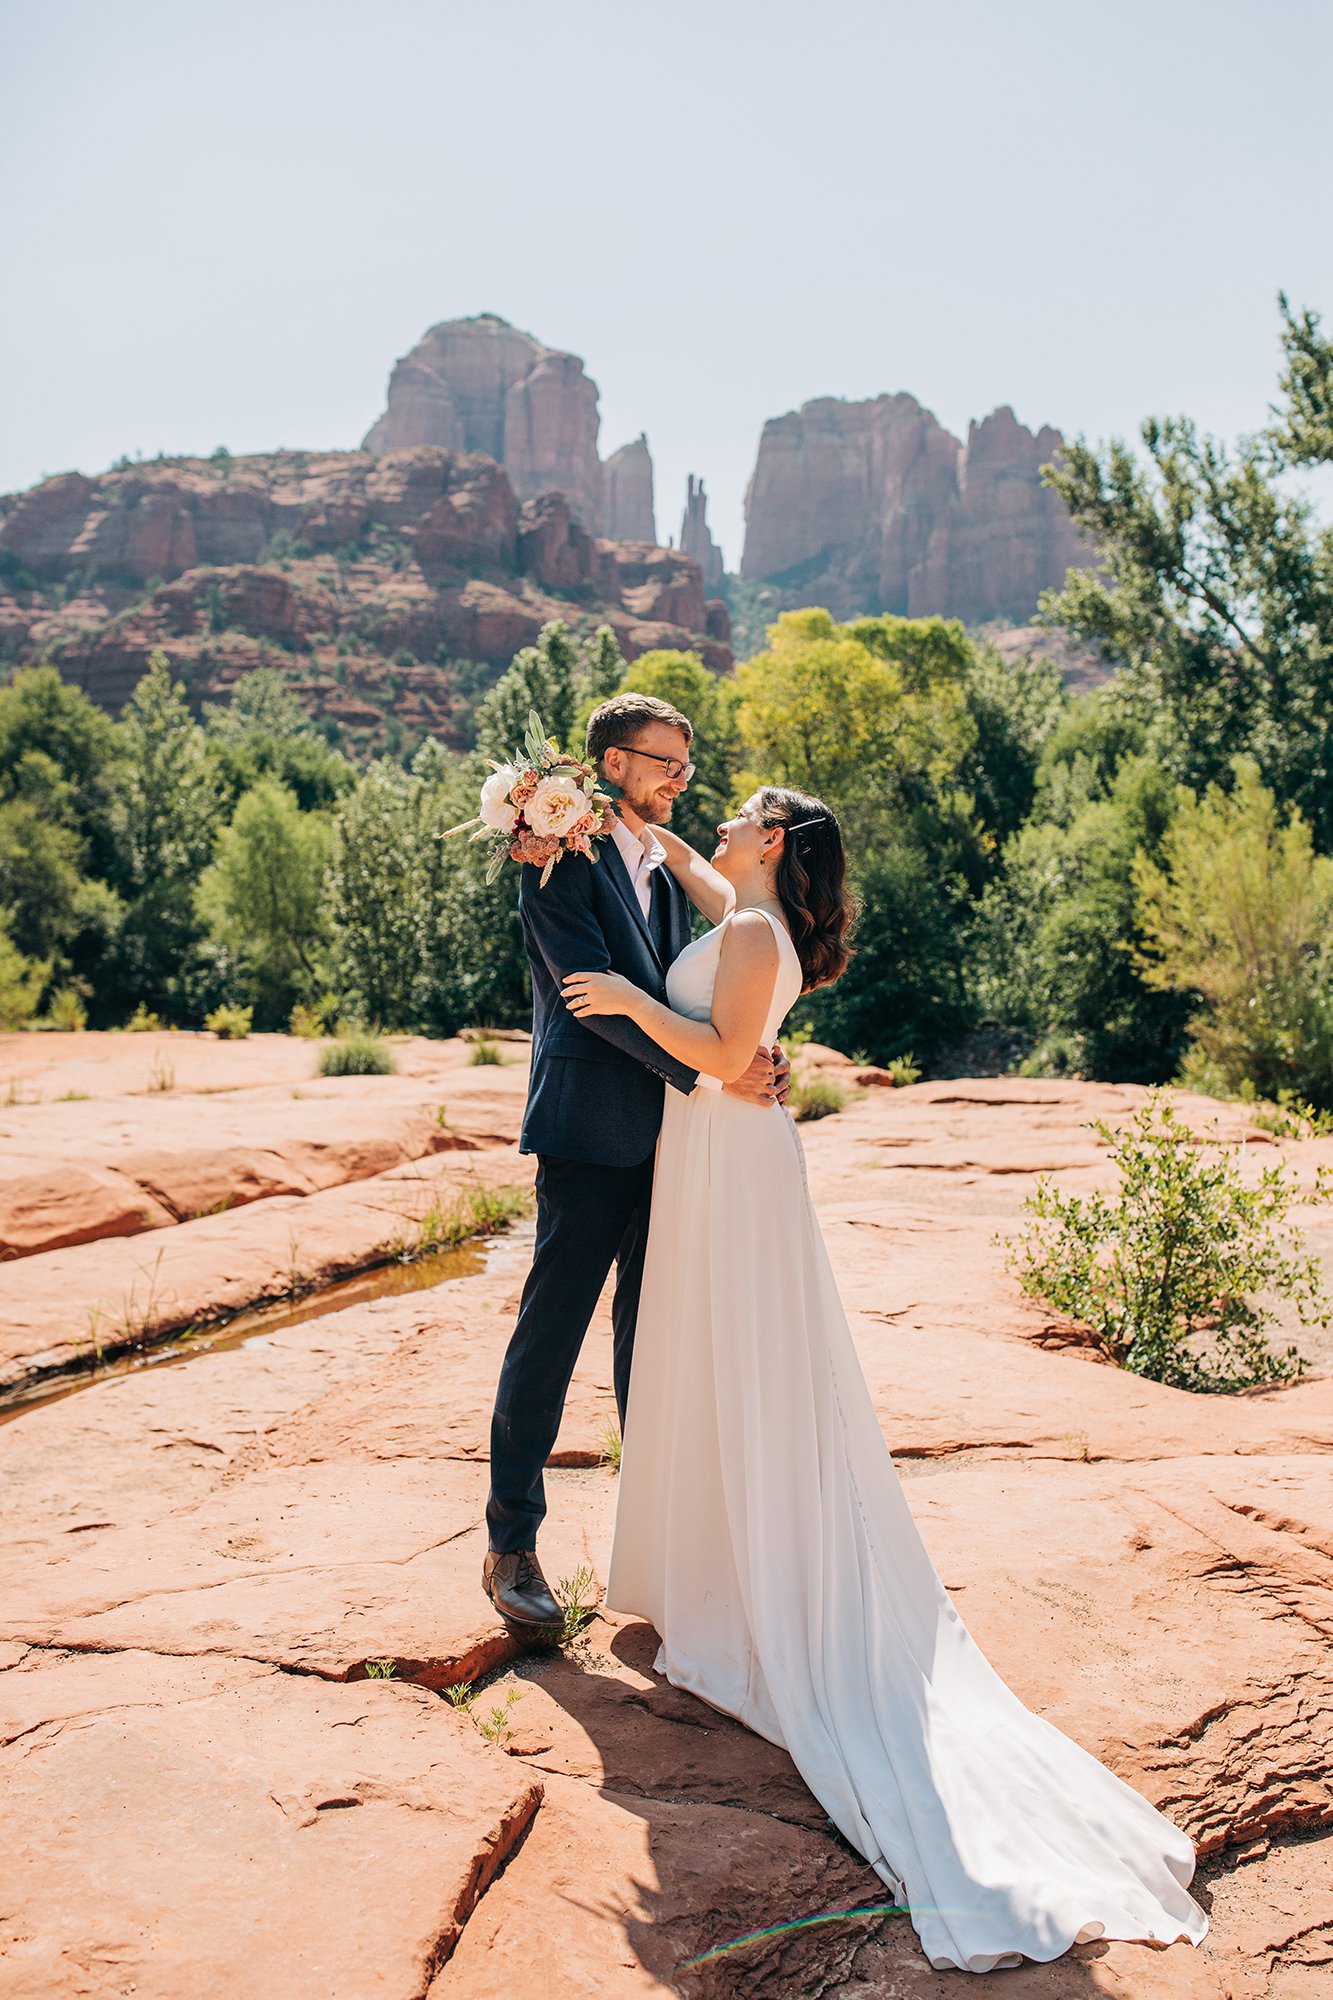 With boquet in hand, Stephanie and Matt smile widely at each other during their Sedona wedding day